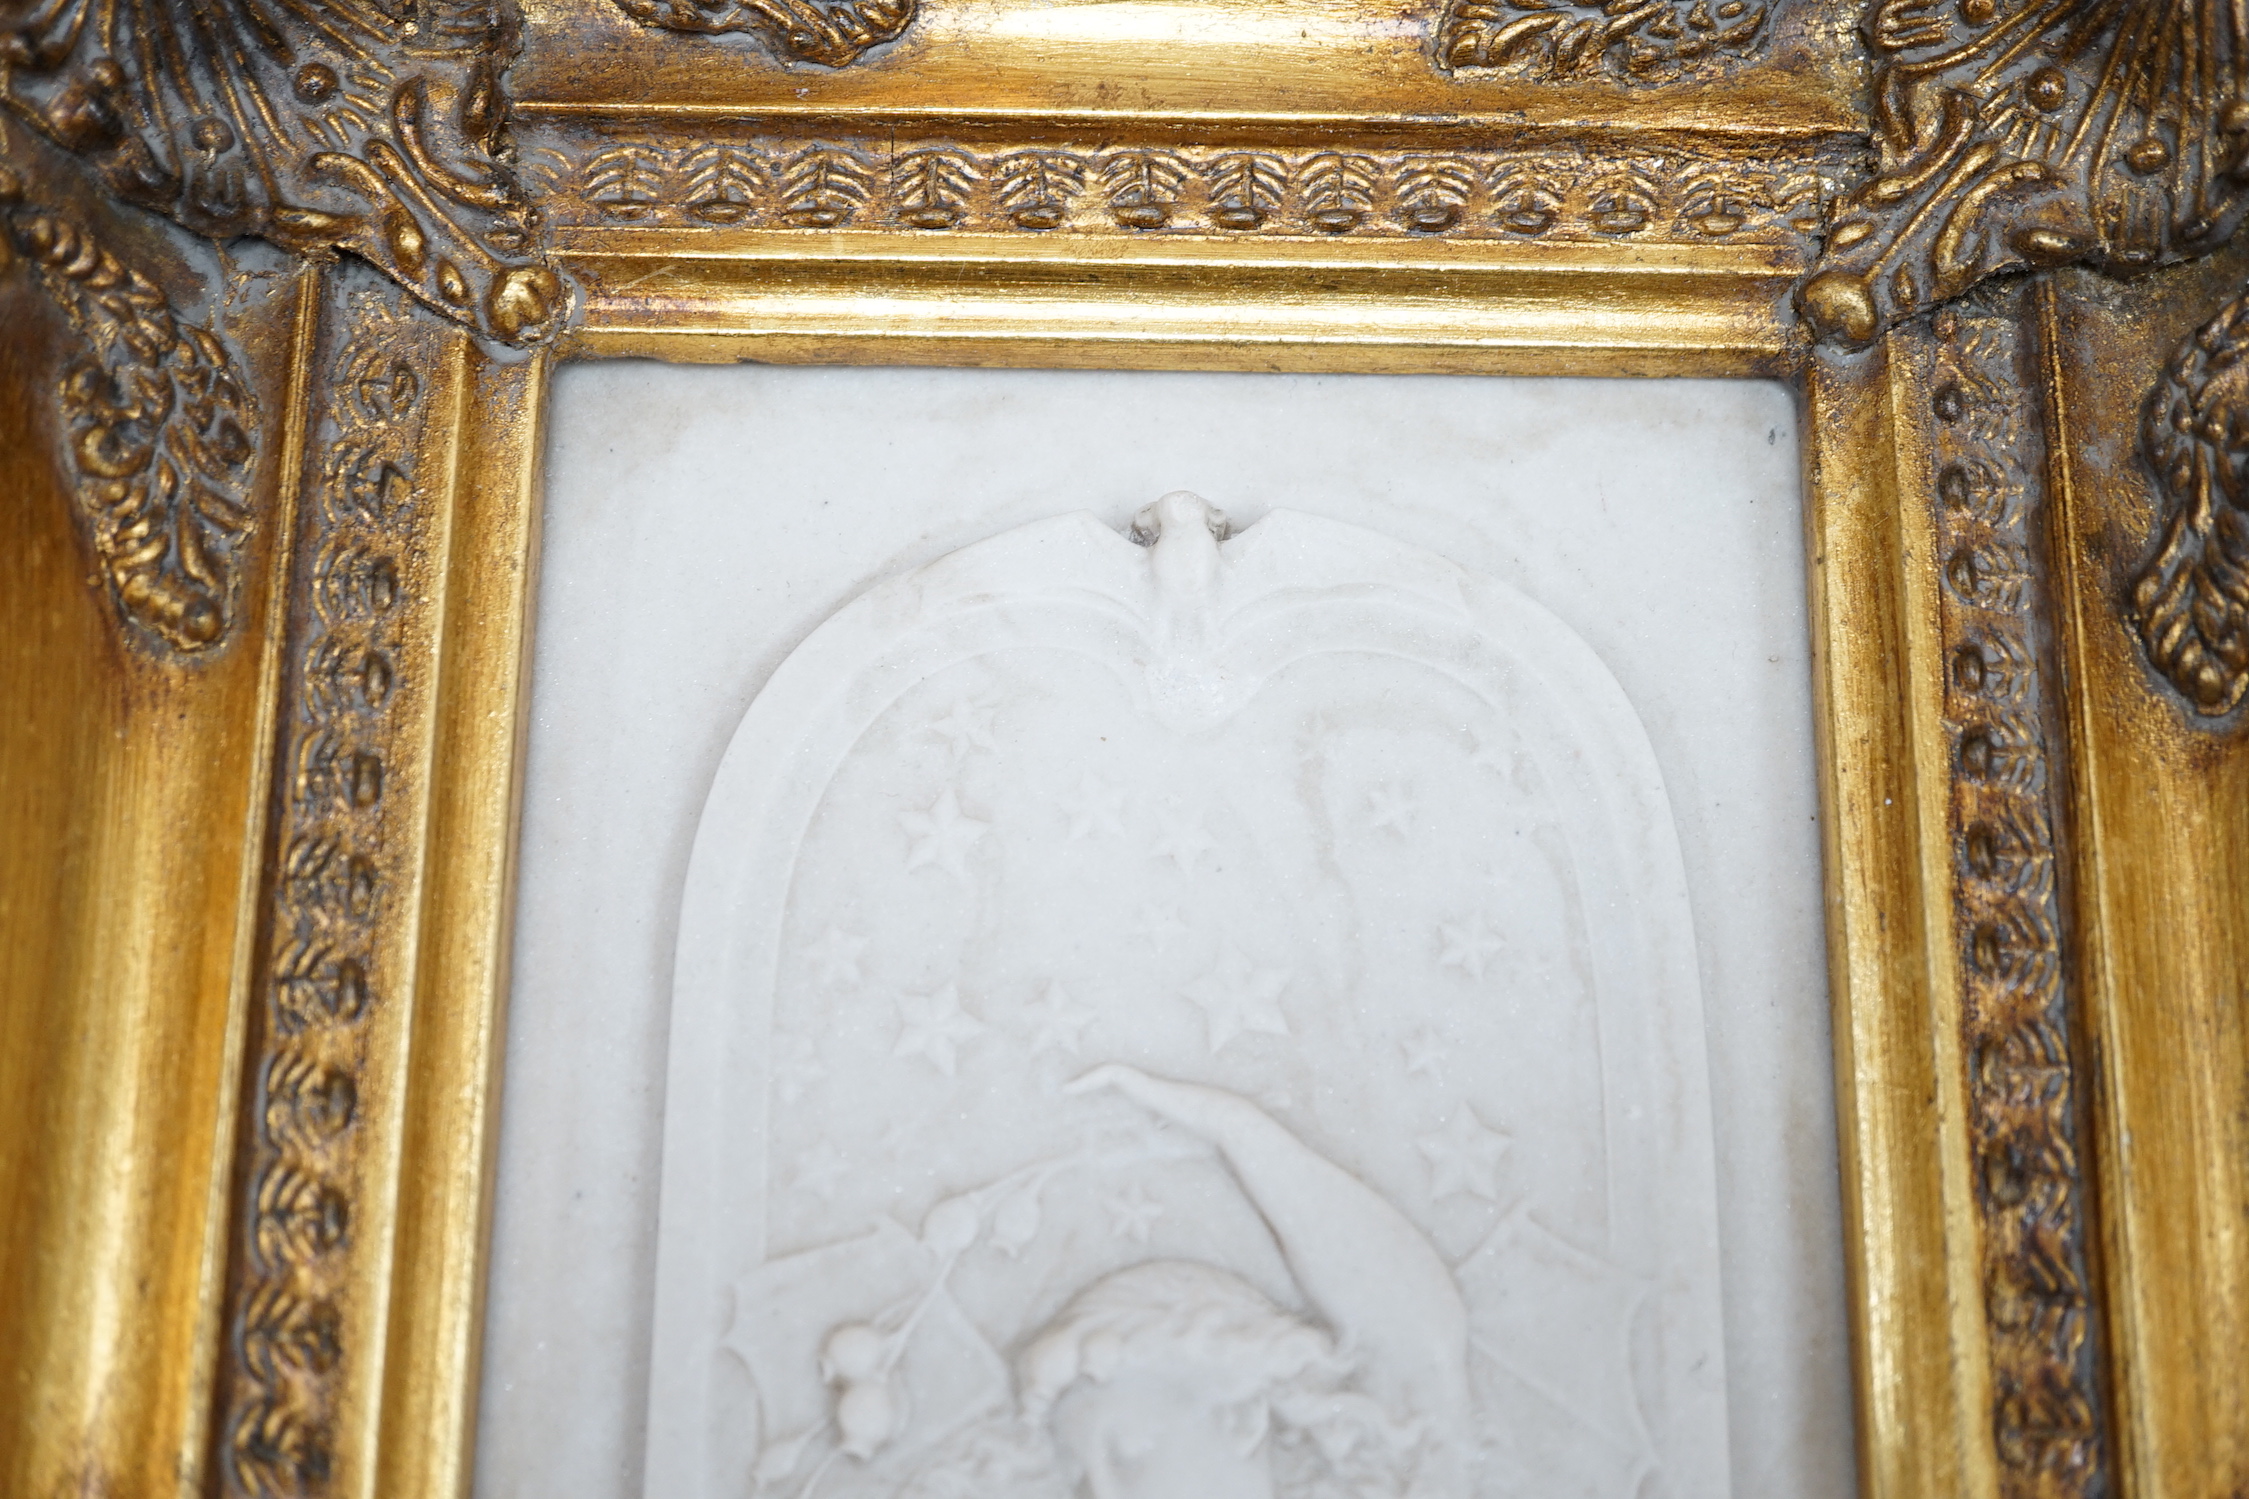 An ornate framed reconstituted stone frieze, 42 x 23cm